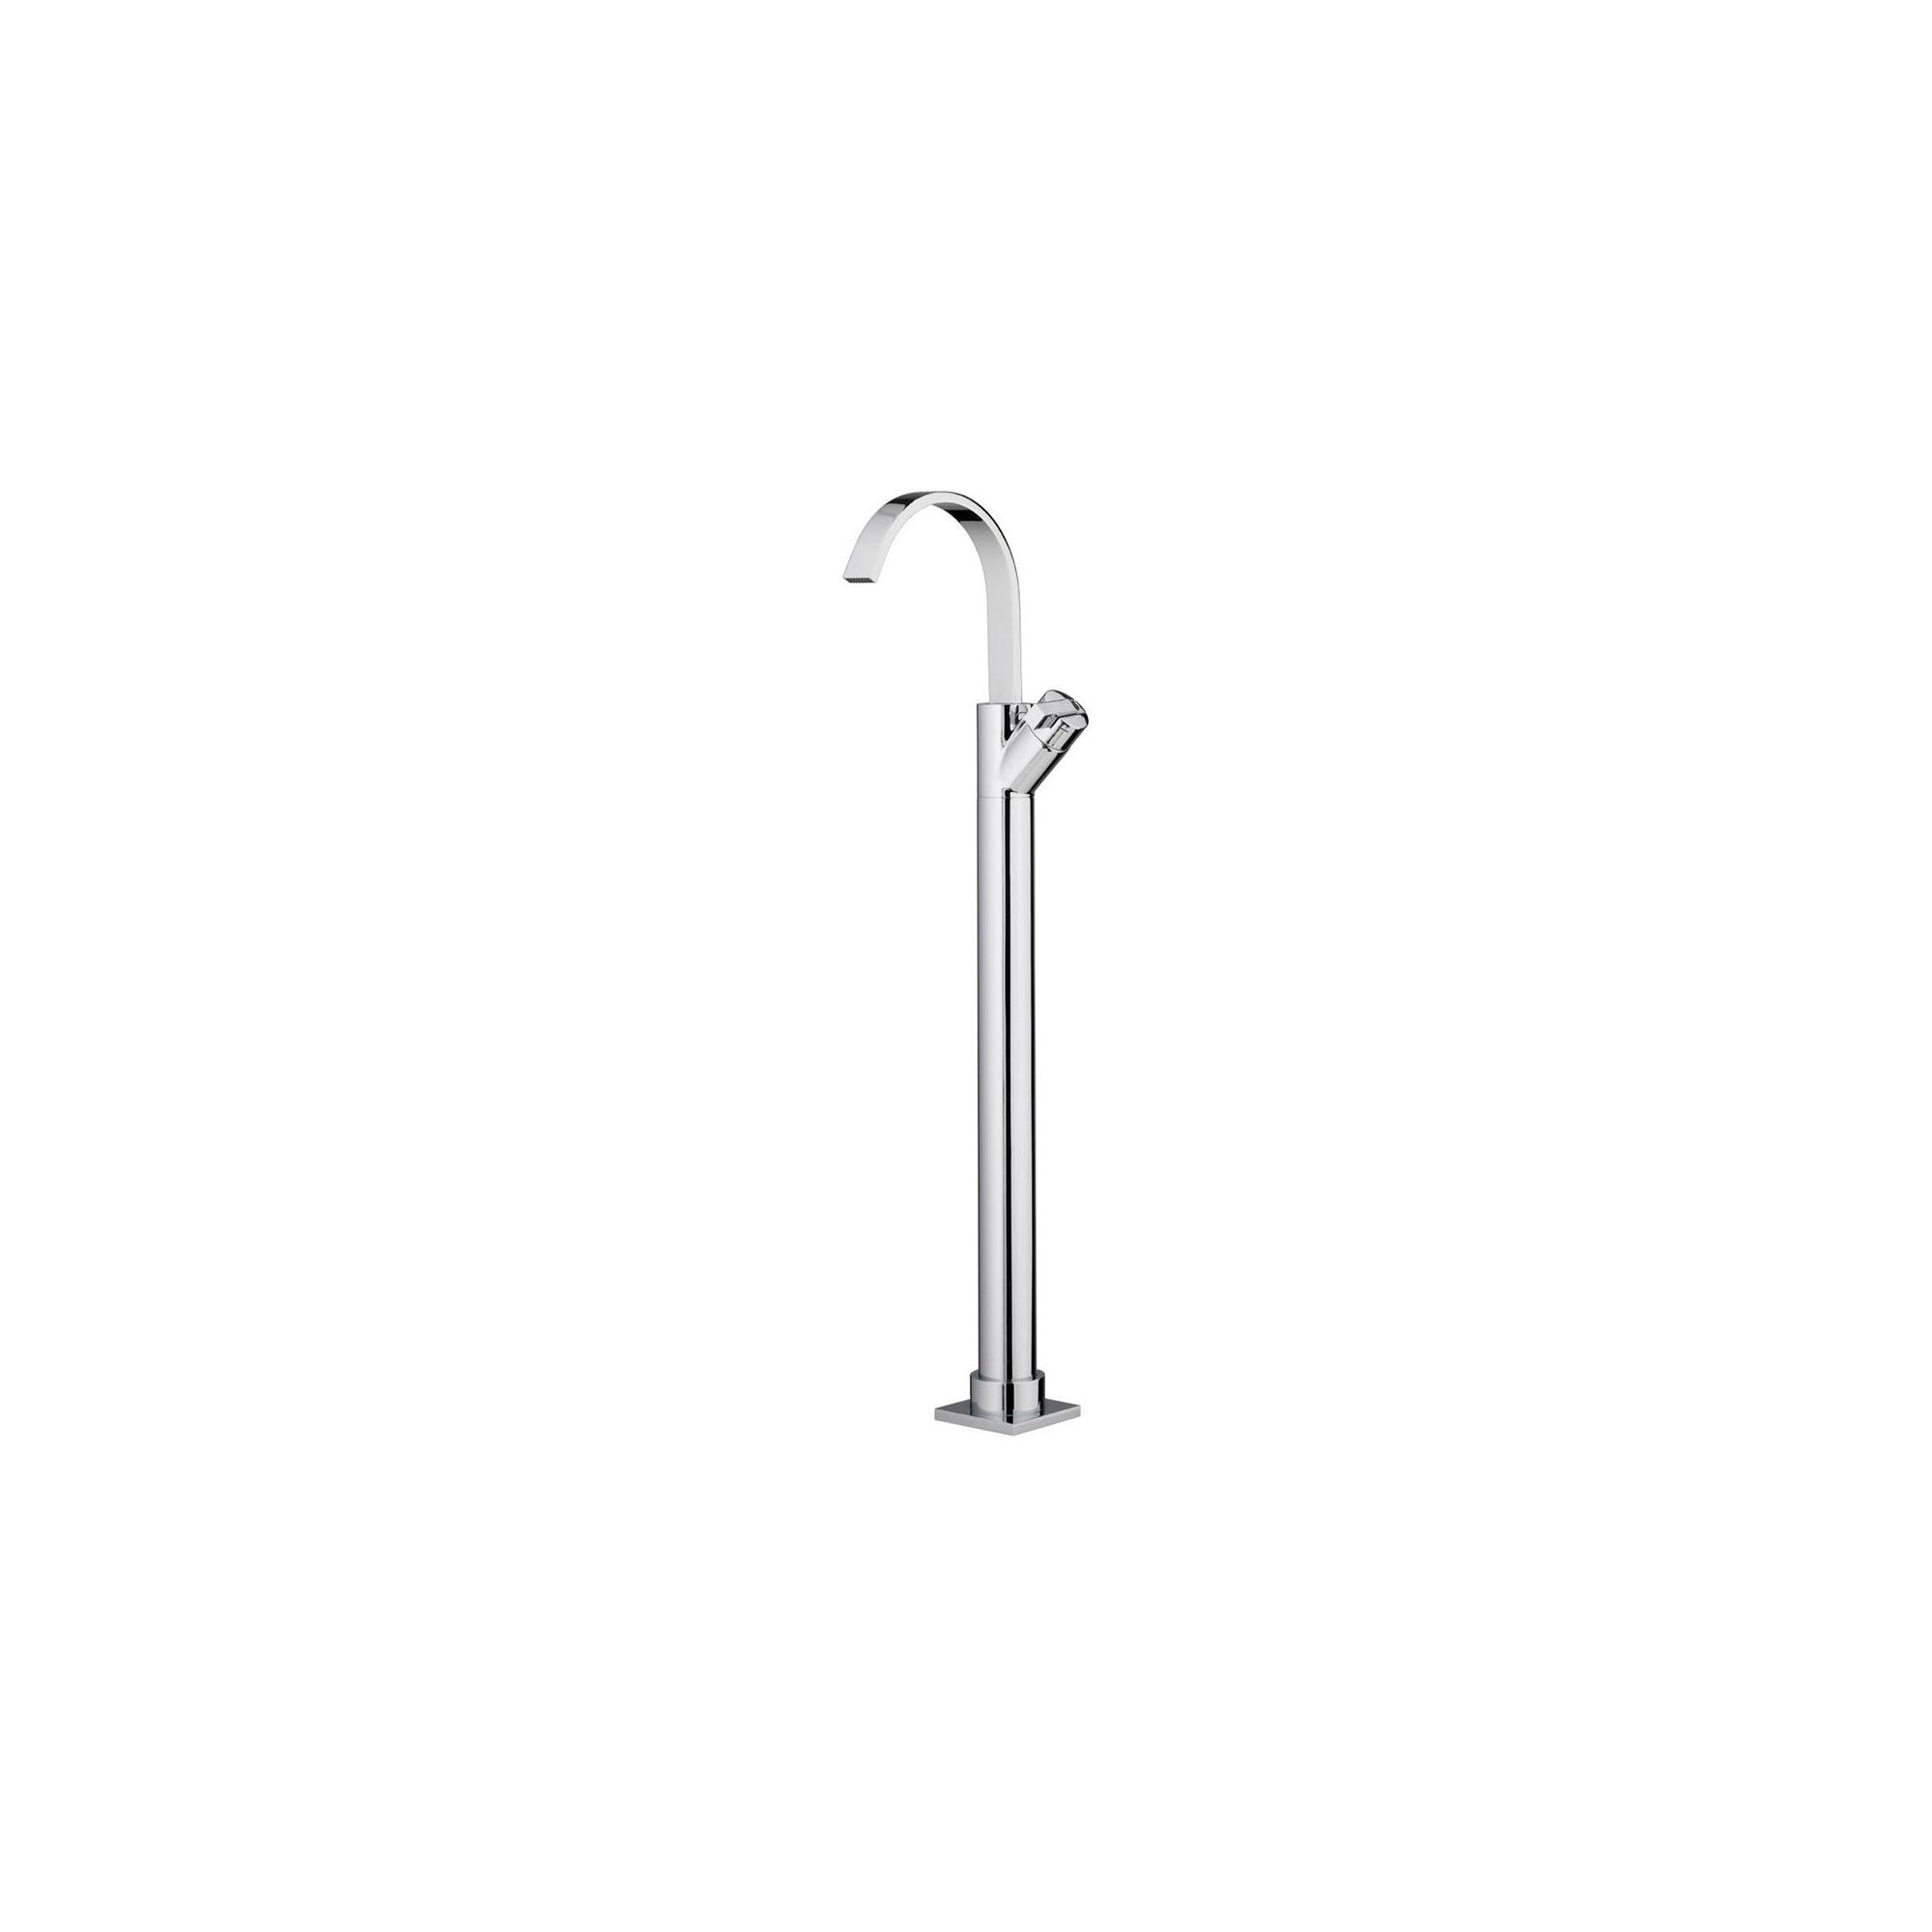 Bristan Chill Floor Mounted Bath Filler Tap Chrome Plated at Tesco Direct